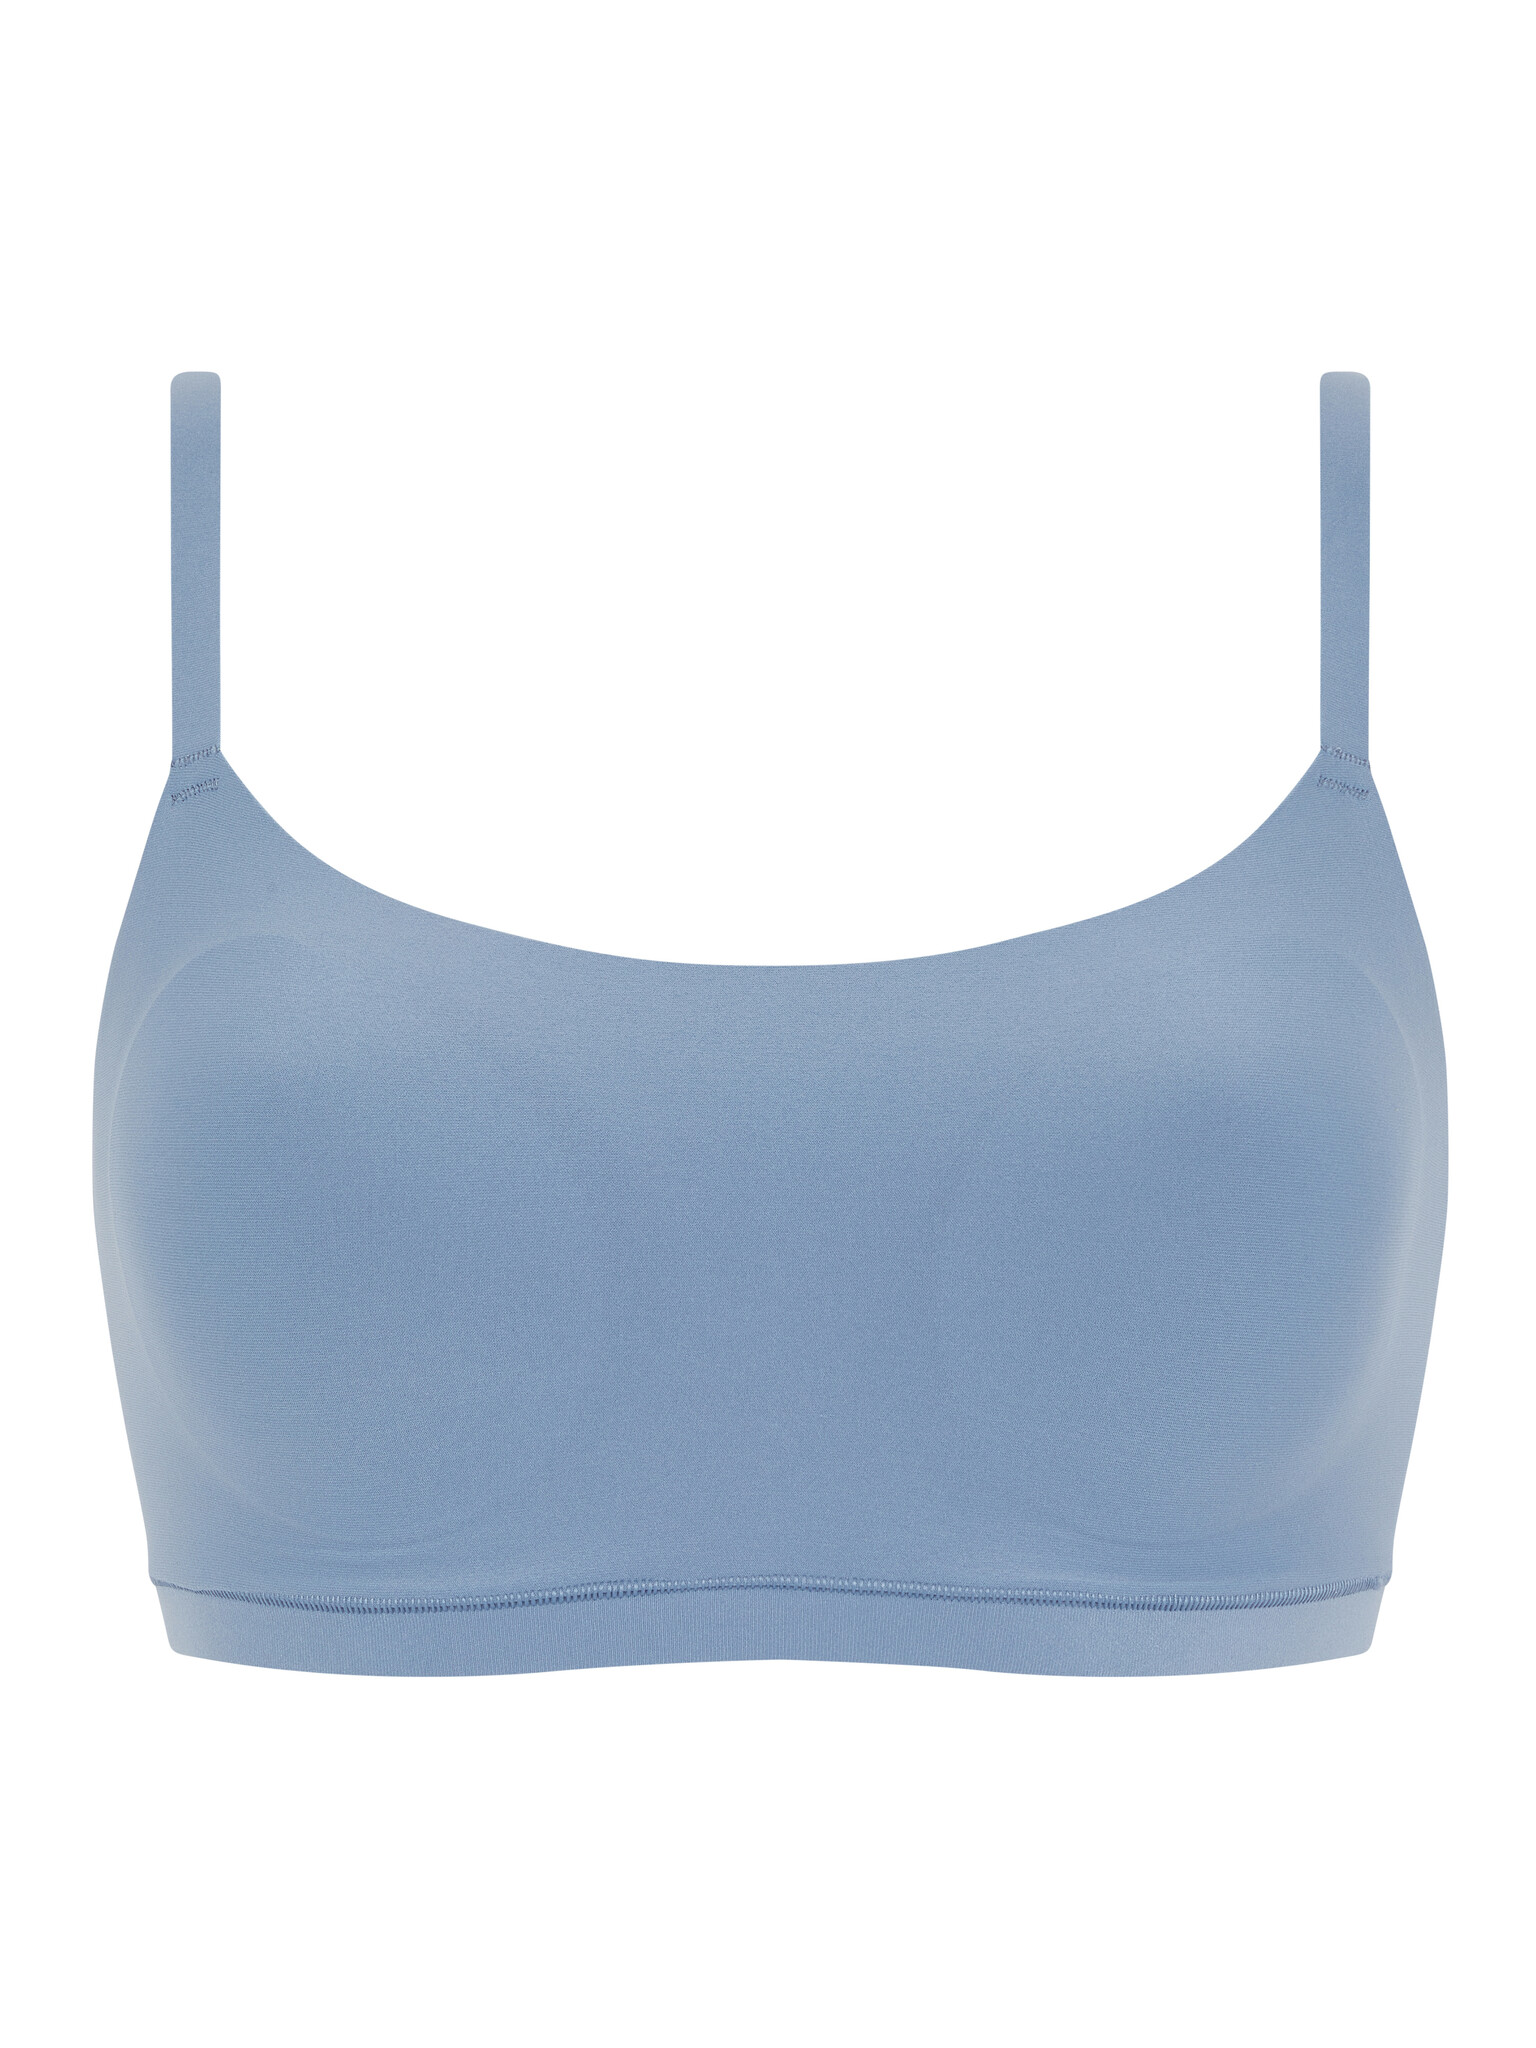 Chantelle 16A2 SoftStretch Scoop Padded Bralette - Mist - Allure Intimate  Apparel